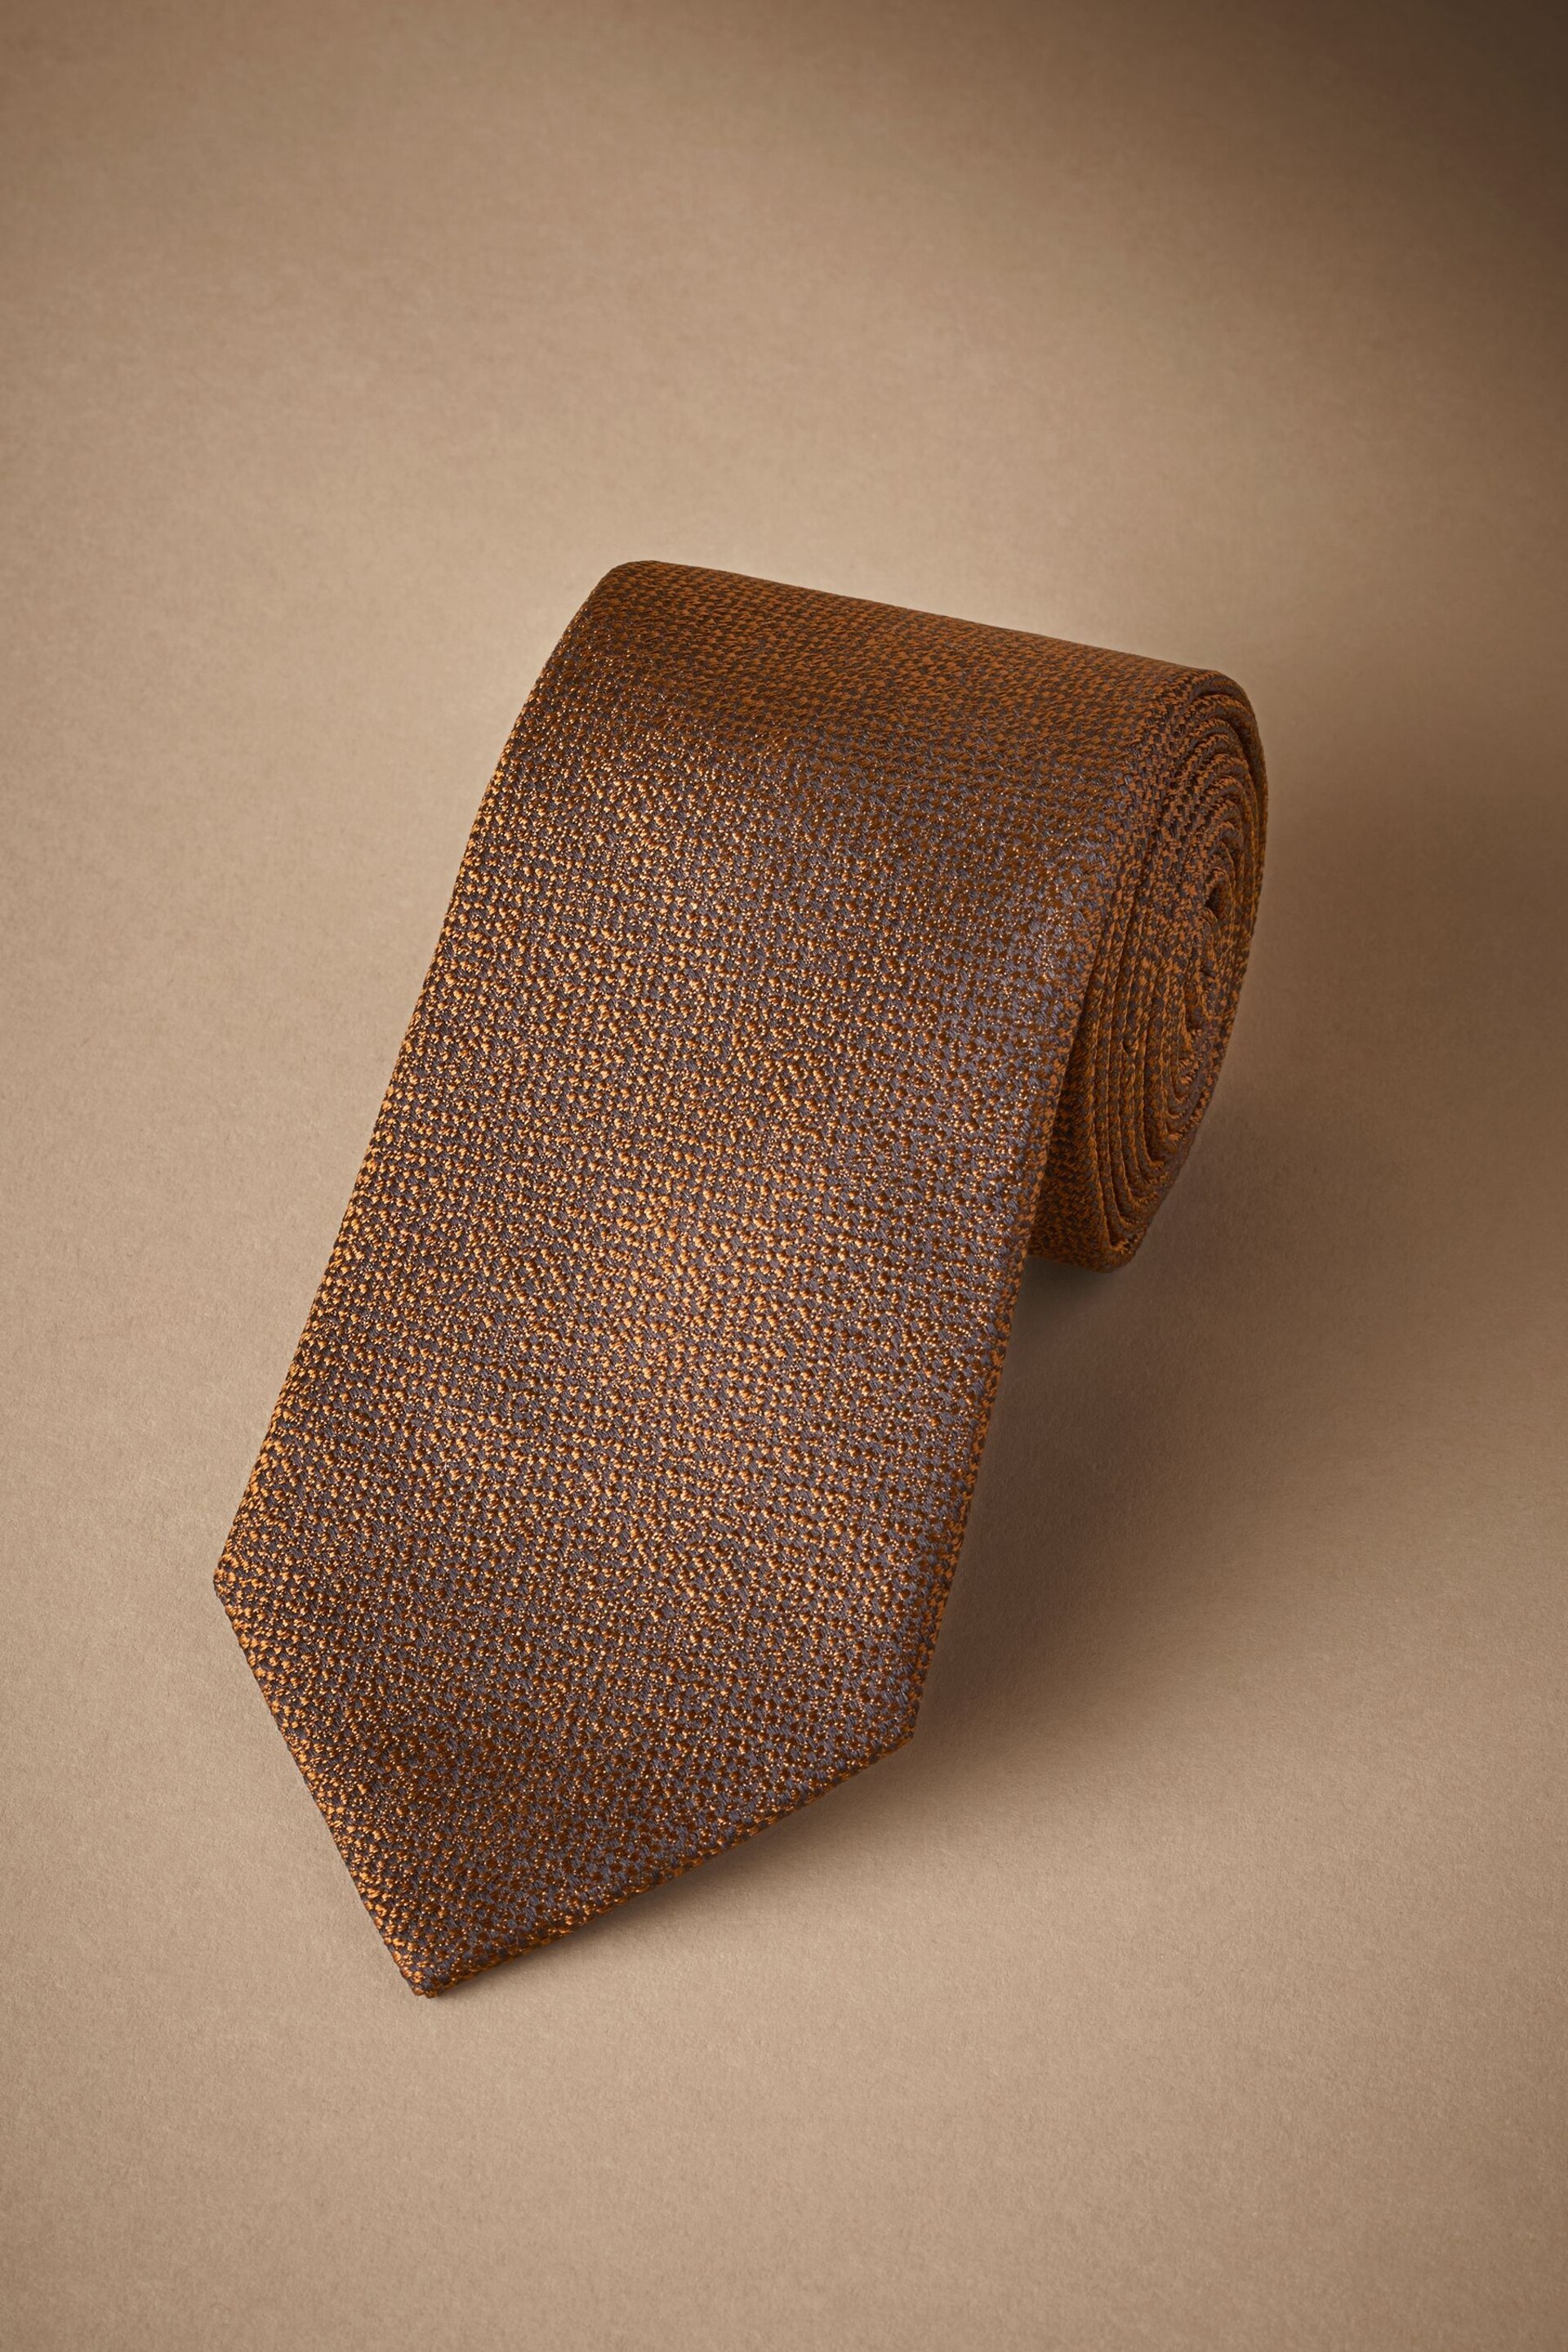 Bronze Brown Signature Made In Italy Tie - Image 1 of 3